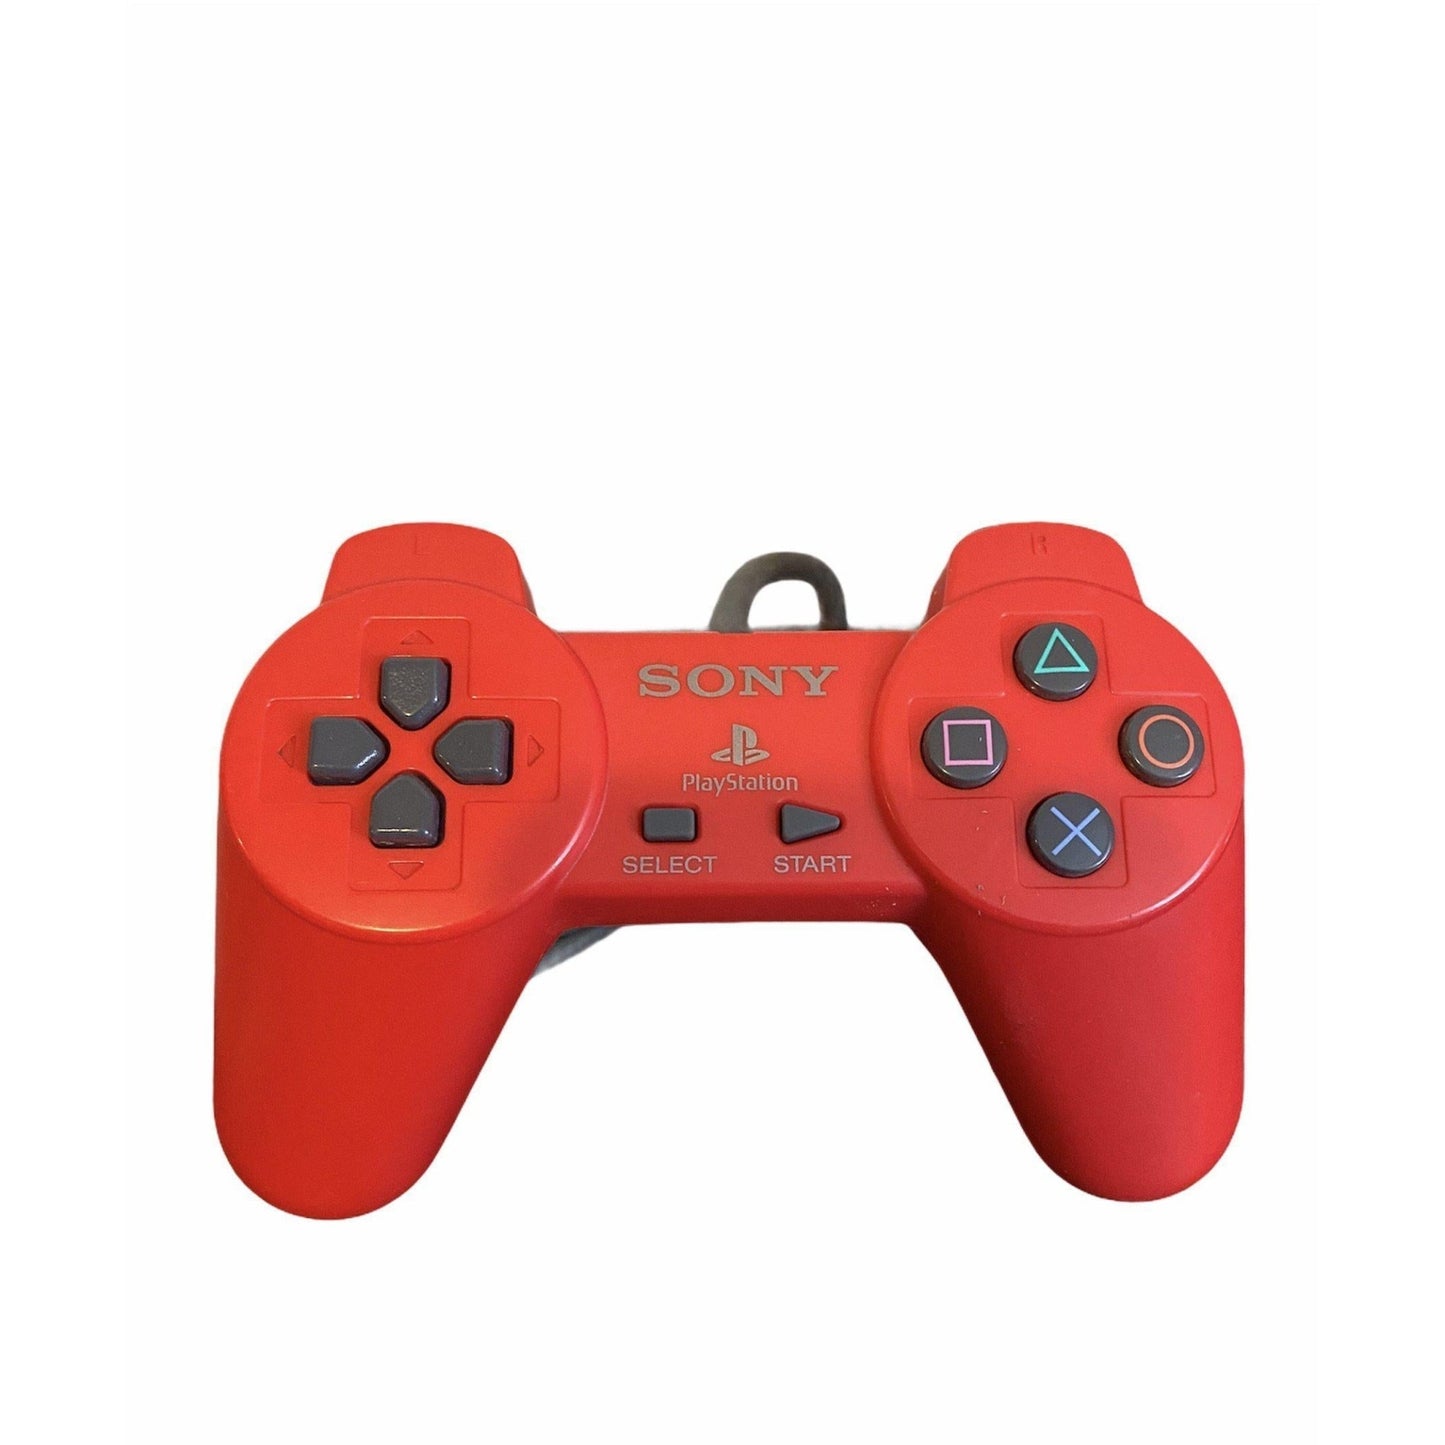 SON YPlayStation1 PS1 Analog Controller SCPH-1080, Red from 2P Gaming